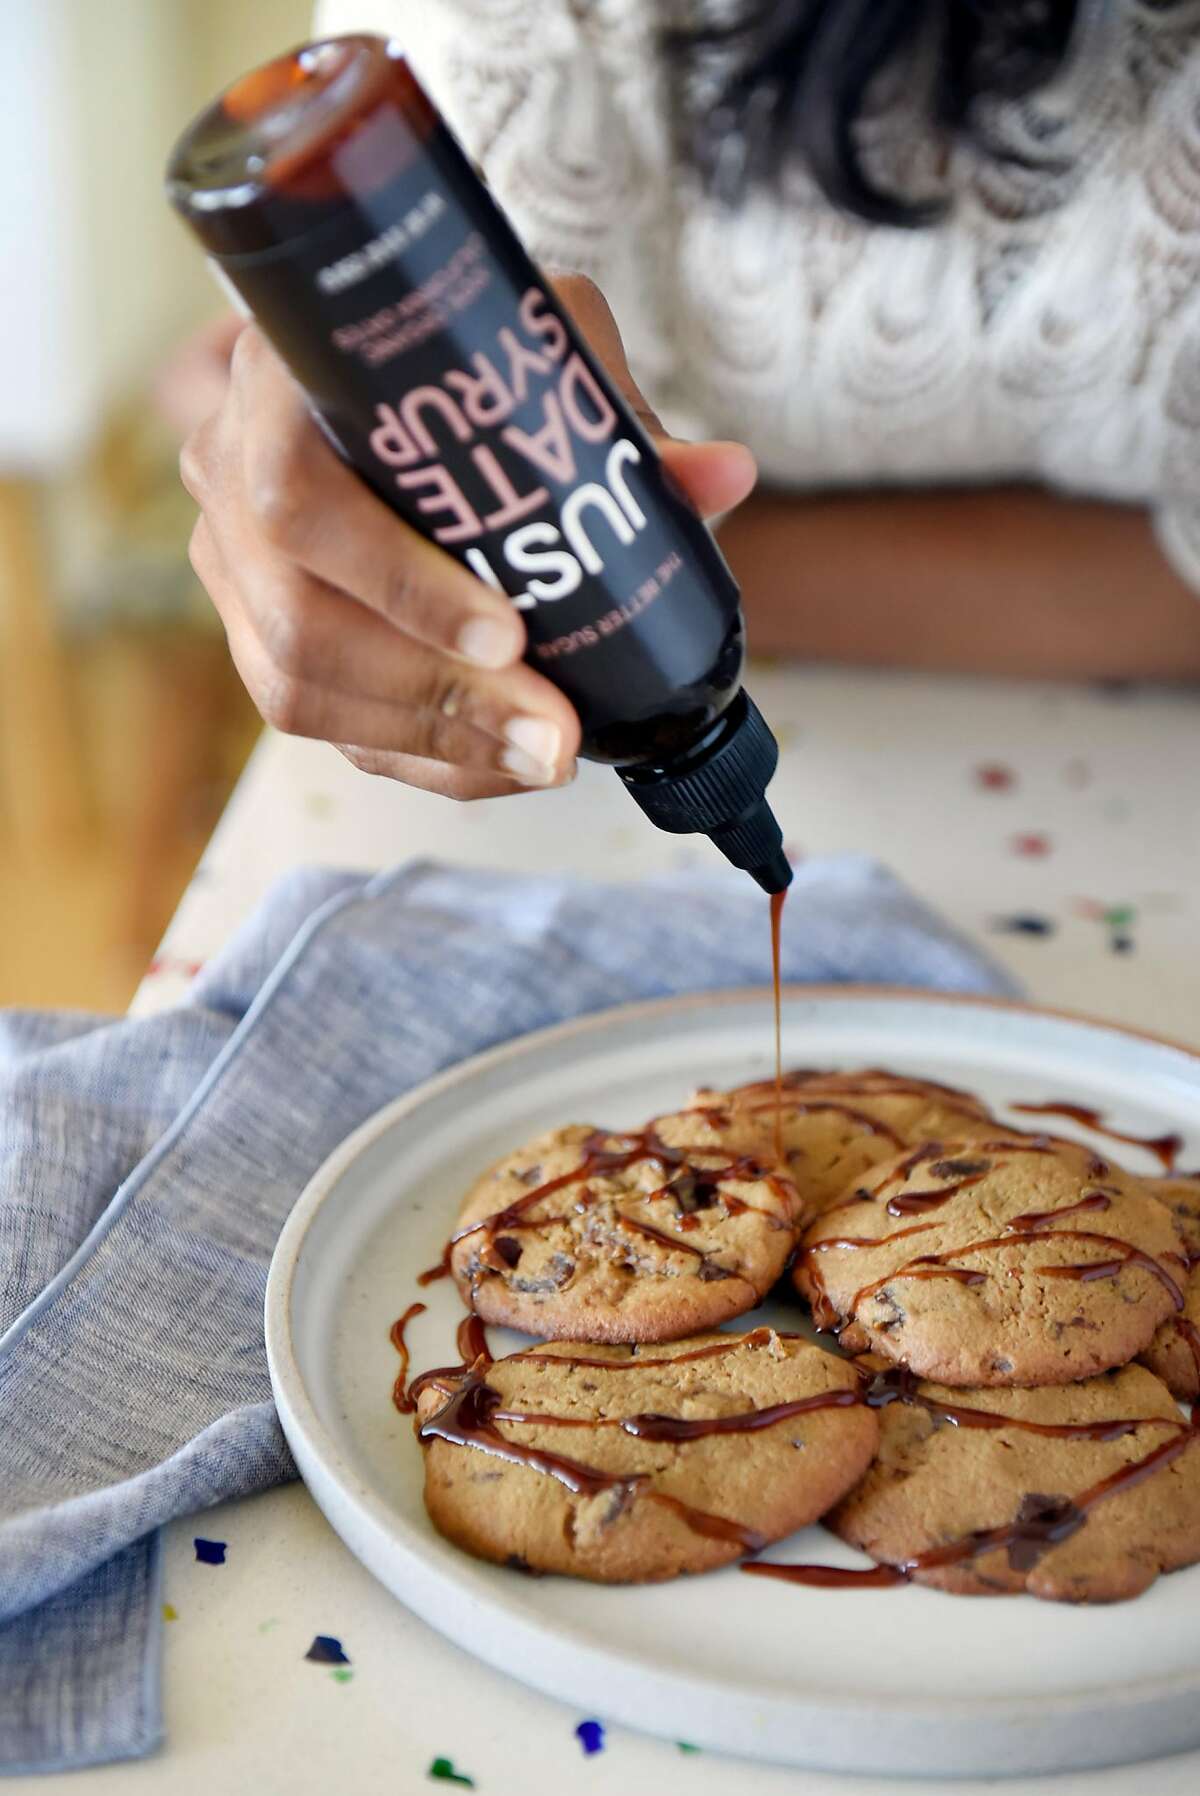 Sylvie Charles drizzles Just Date Syrup on top of a fresh batch of her tahini-date chocolate chip cookies at her home in San Francisco, Calif., on Tuesday June 12, 2018.